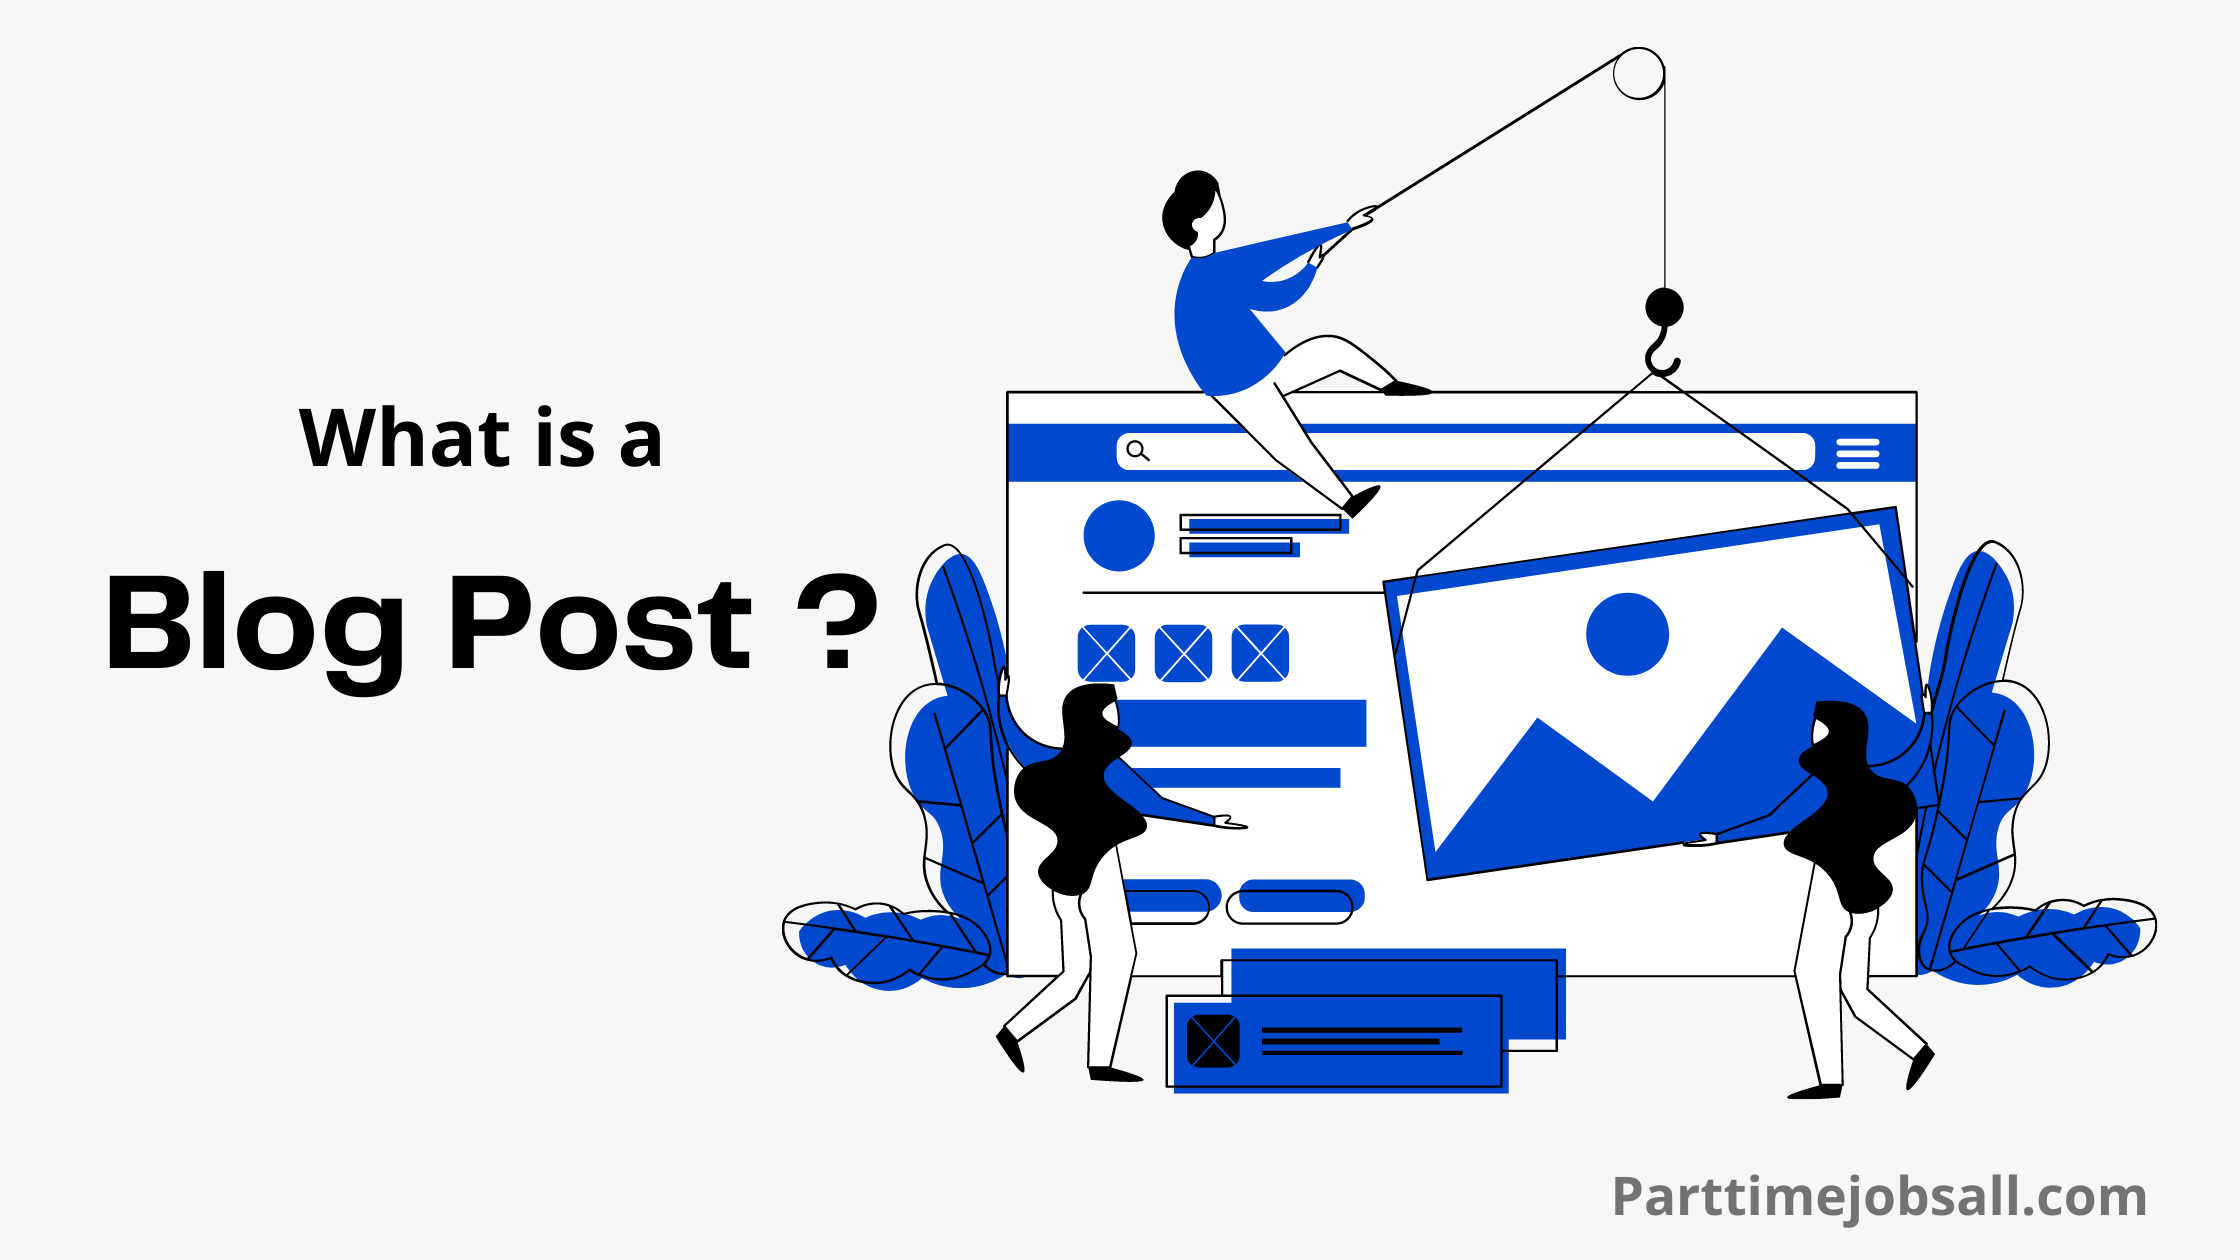 What is a blog post?